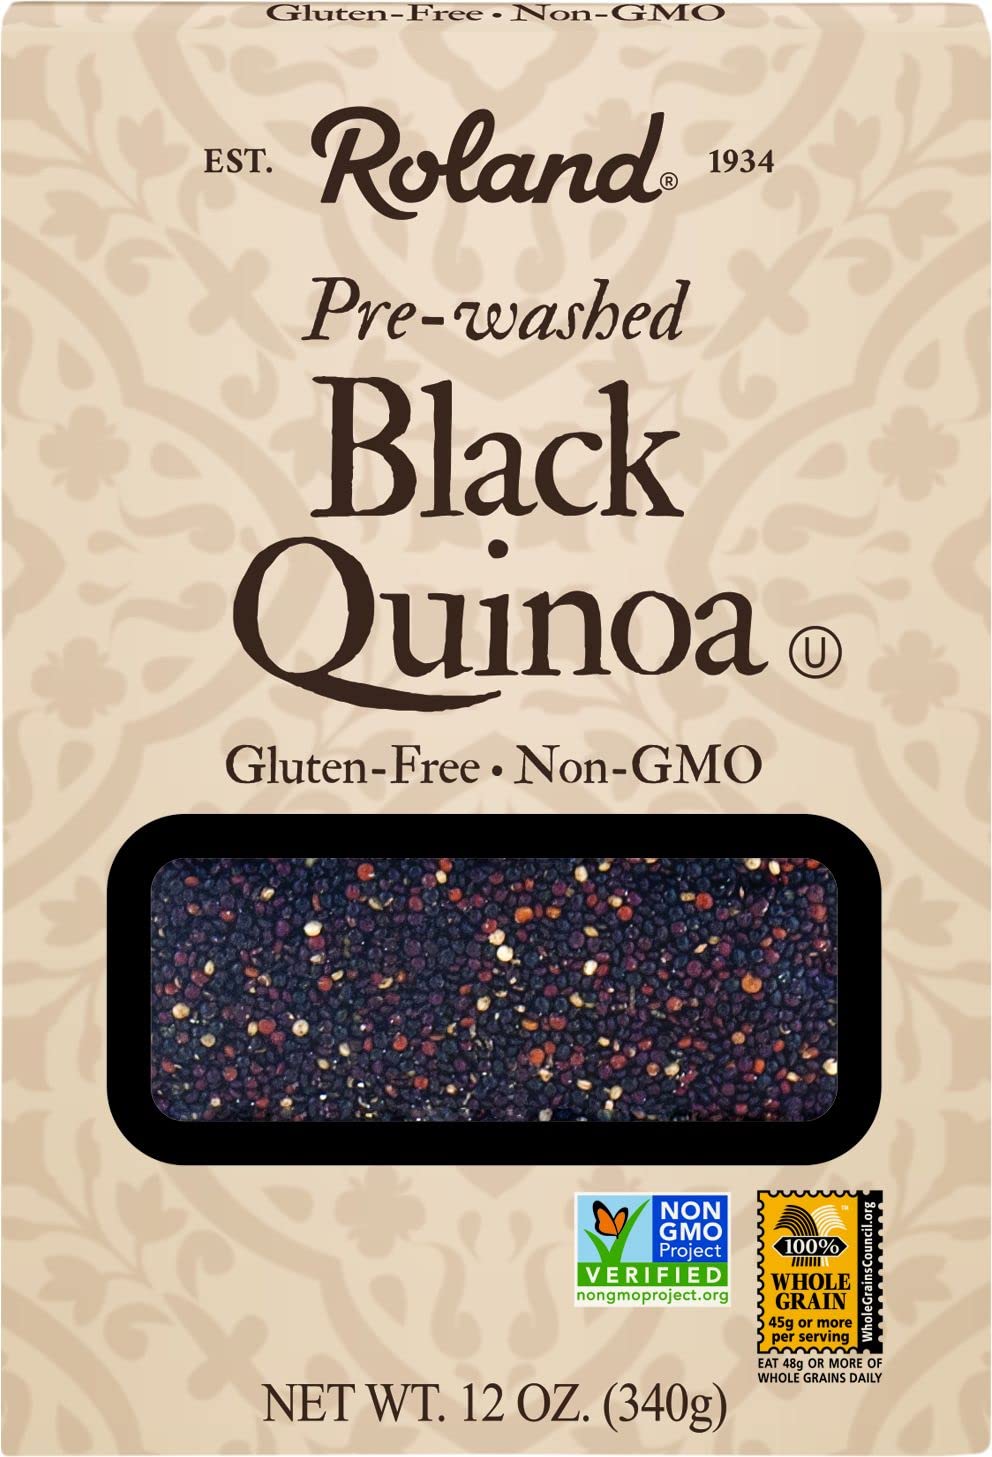 Roland Foods Black Quinoa from Peru, Pre-washed, 12-Ounce